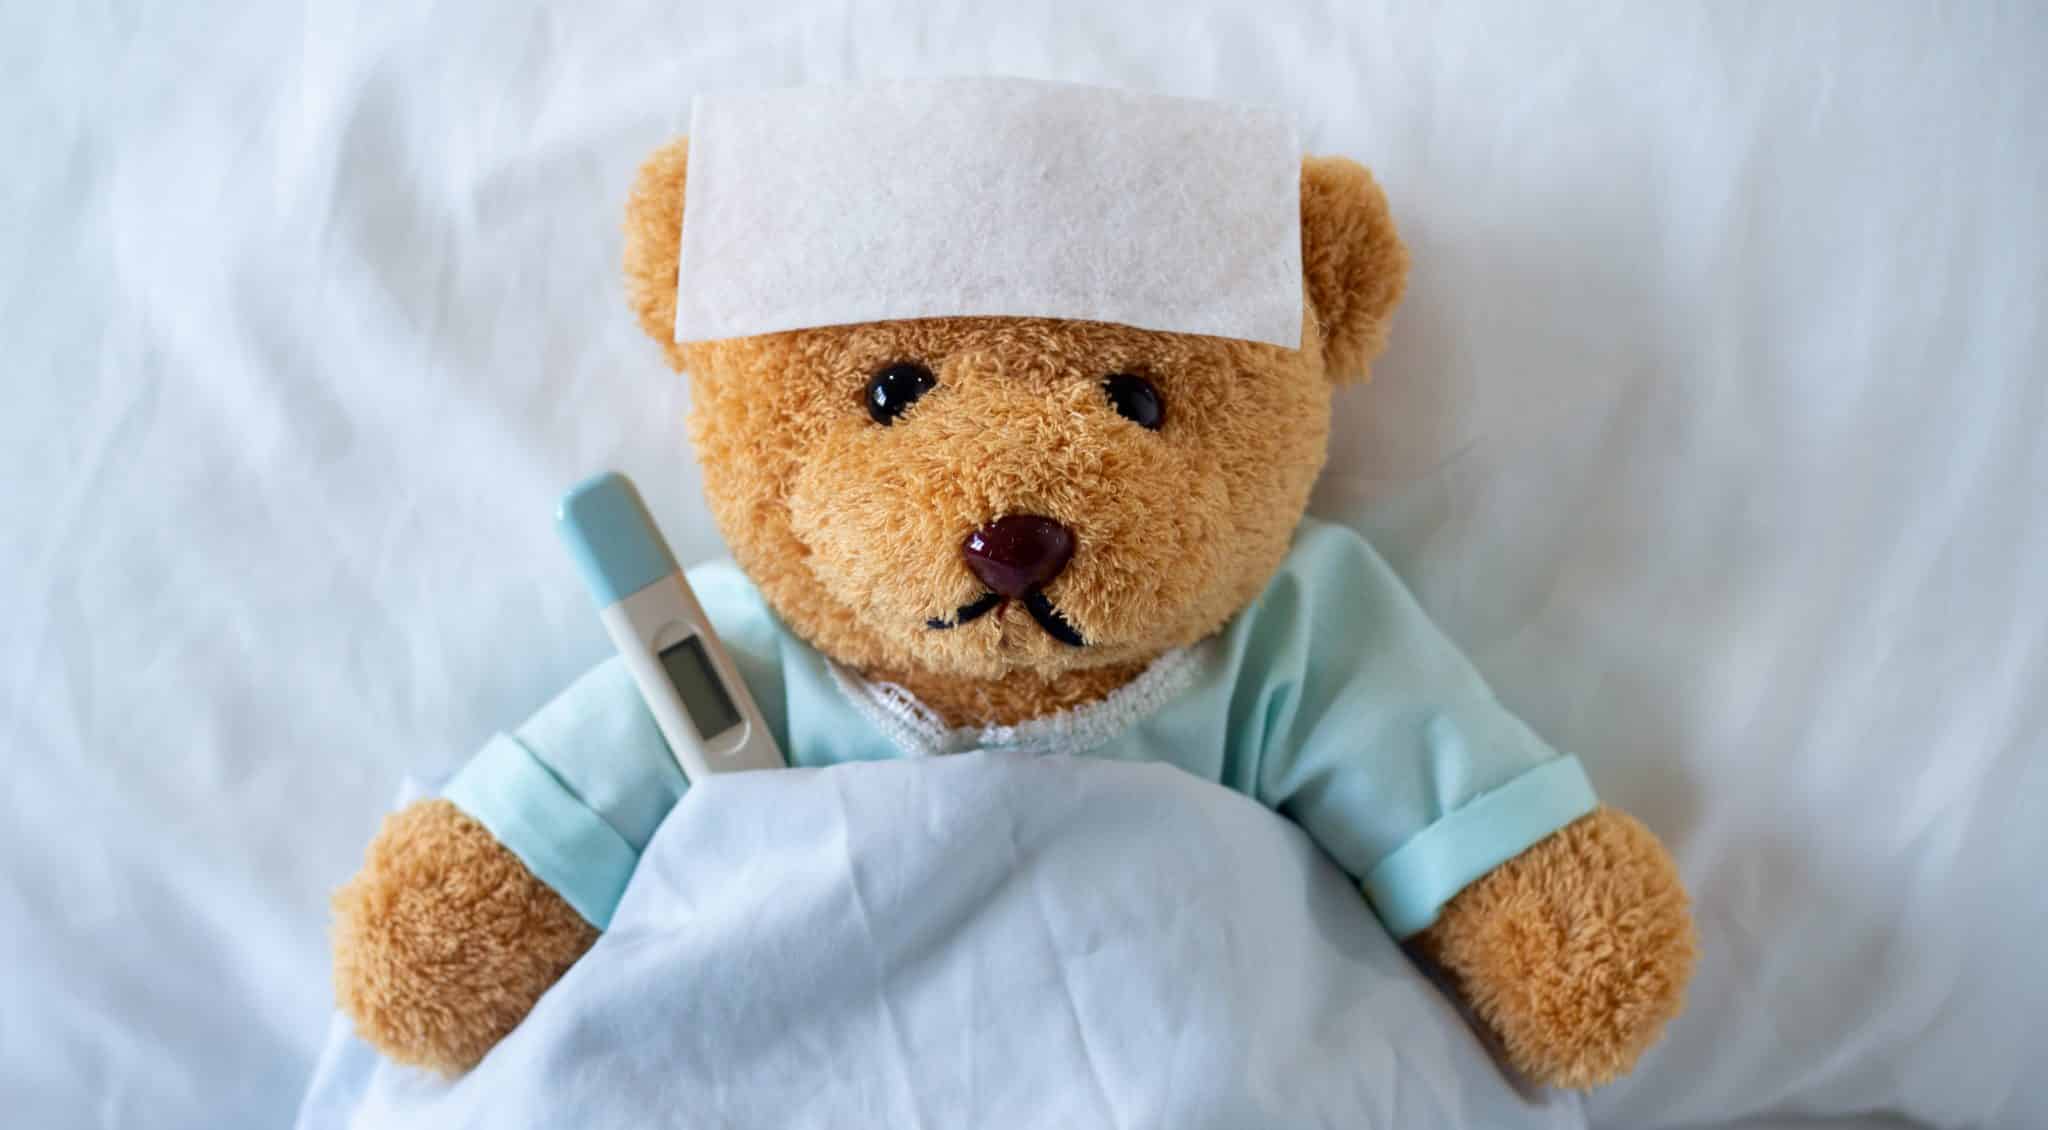 Side effects are expected. Teddy bear with cold pack and thermometer